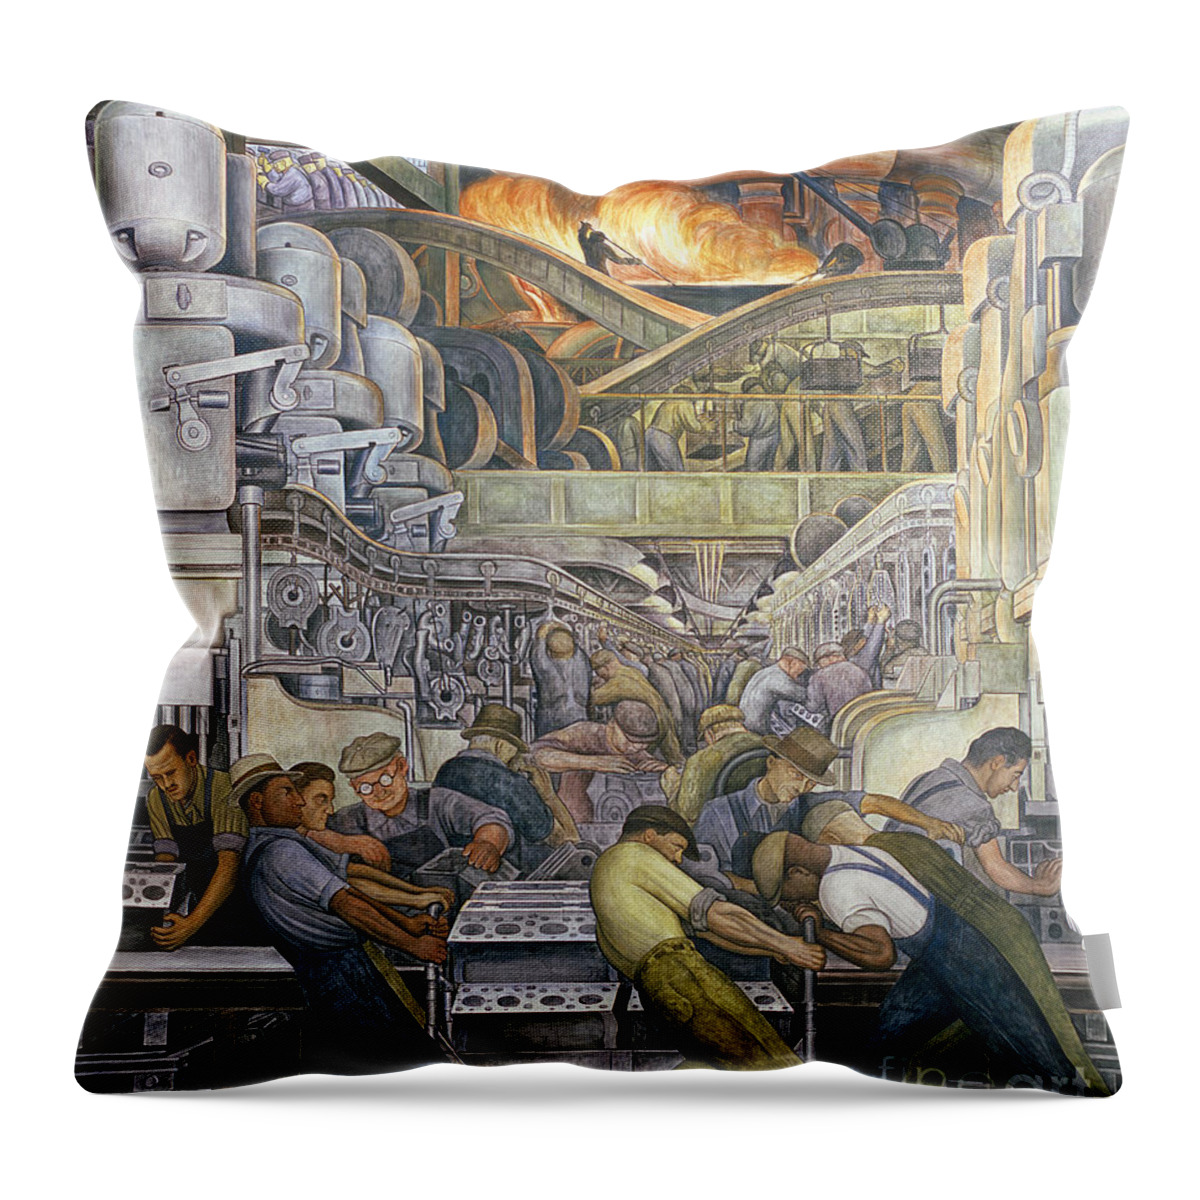 Machinery Throw Pillow featuring the painting Detroit Industry North Wall by Diego Rivera